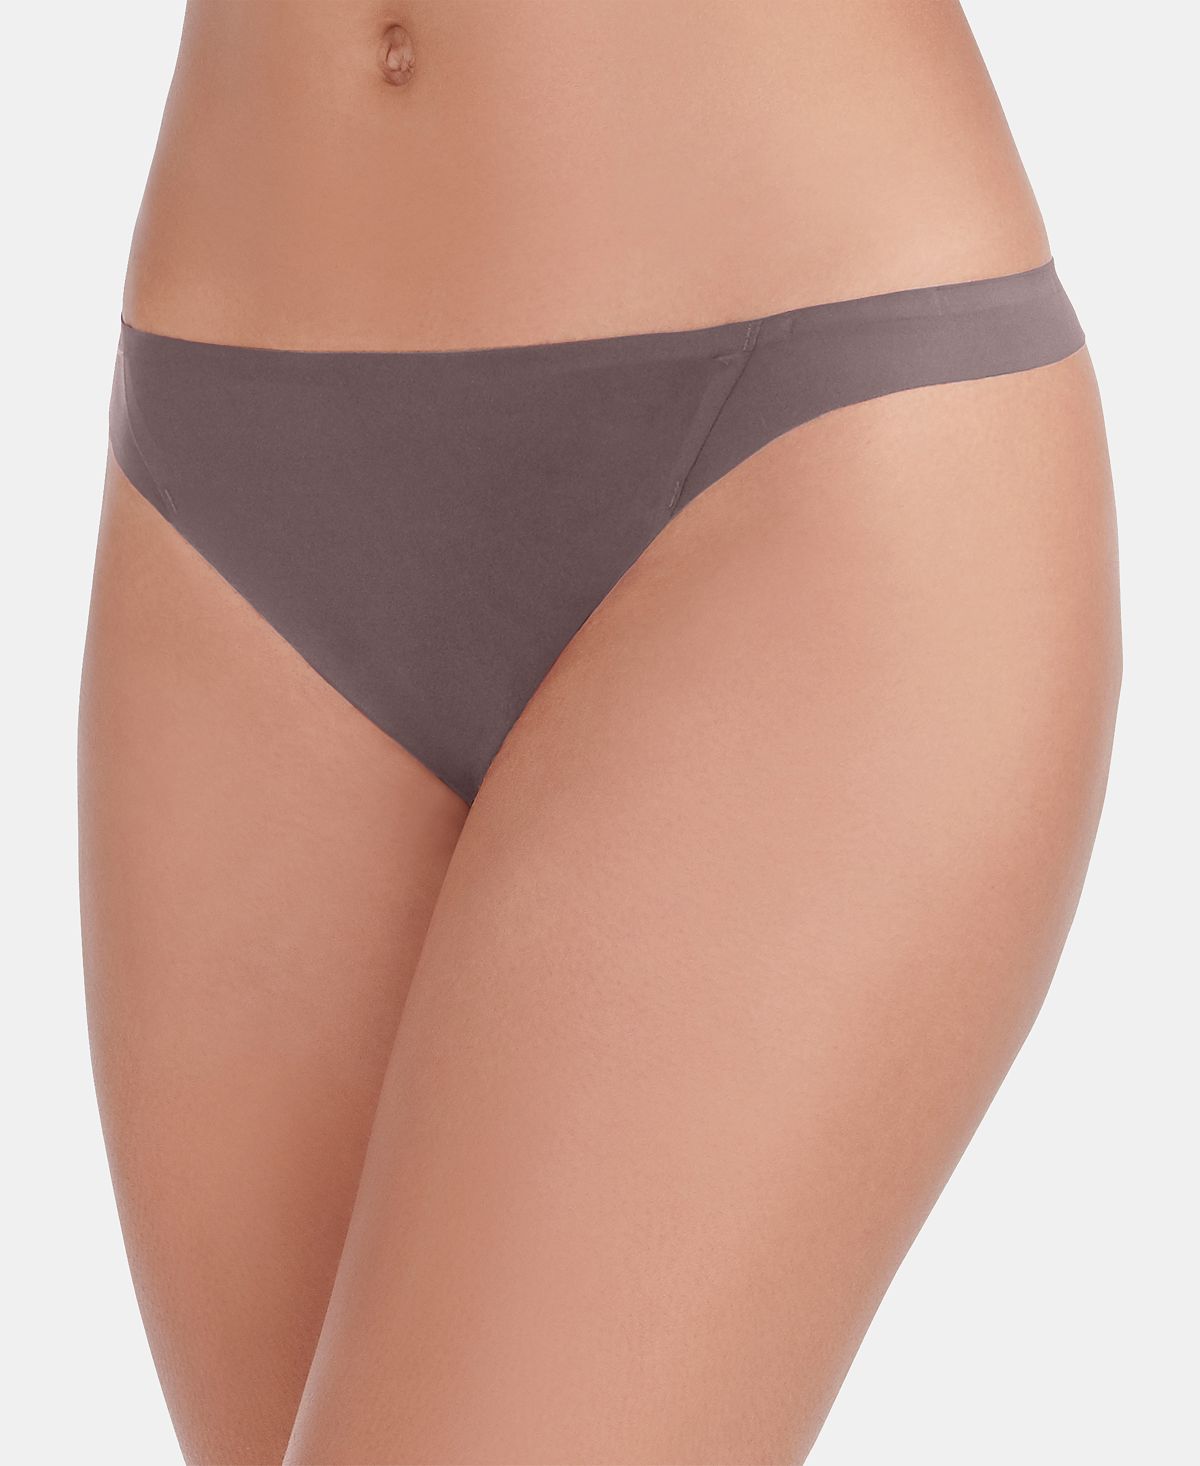 Vanity Fair Nearly Invisible Thong Underwear 18241 Also Available In Extended Sizes Deep Mauve